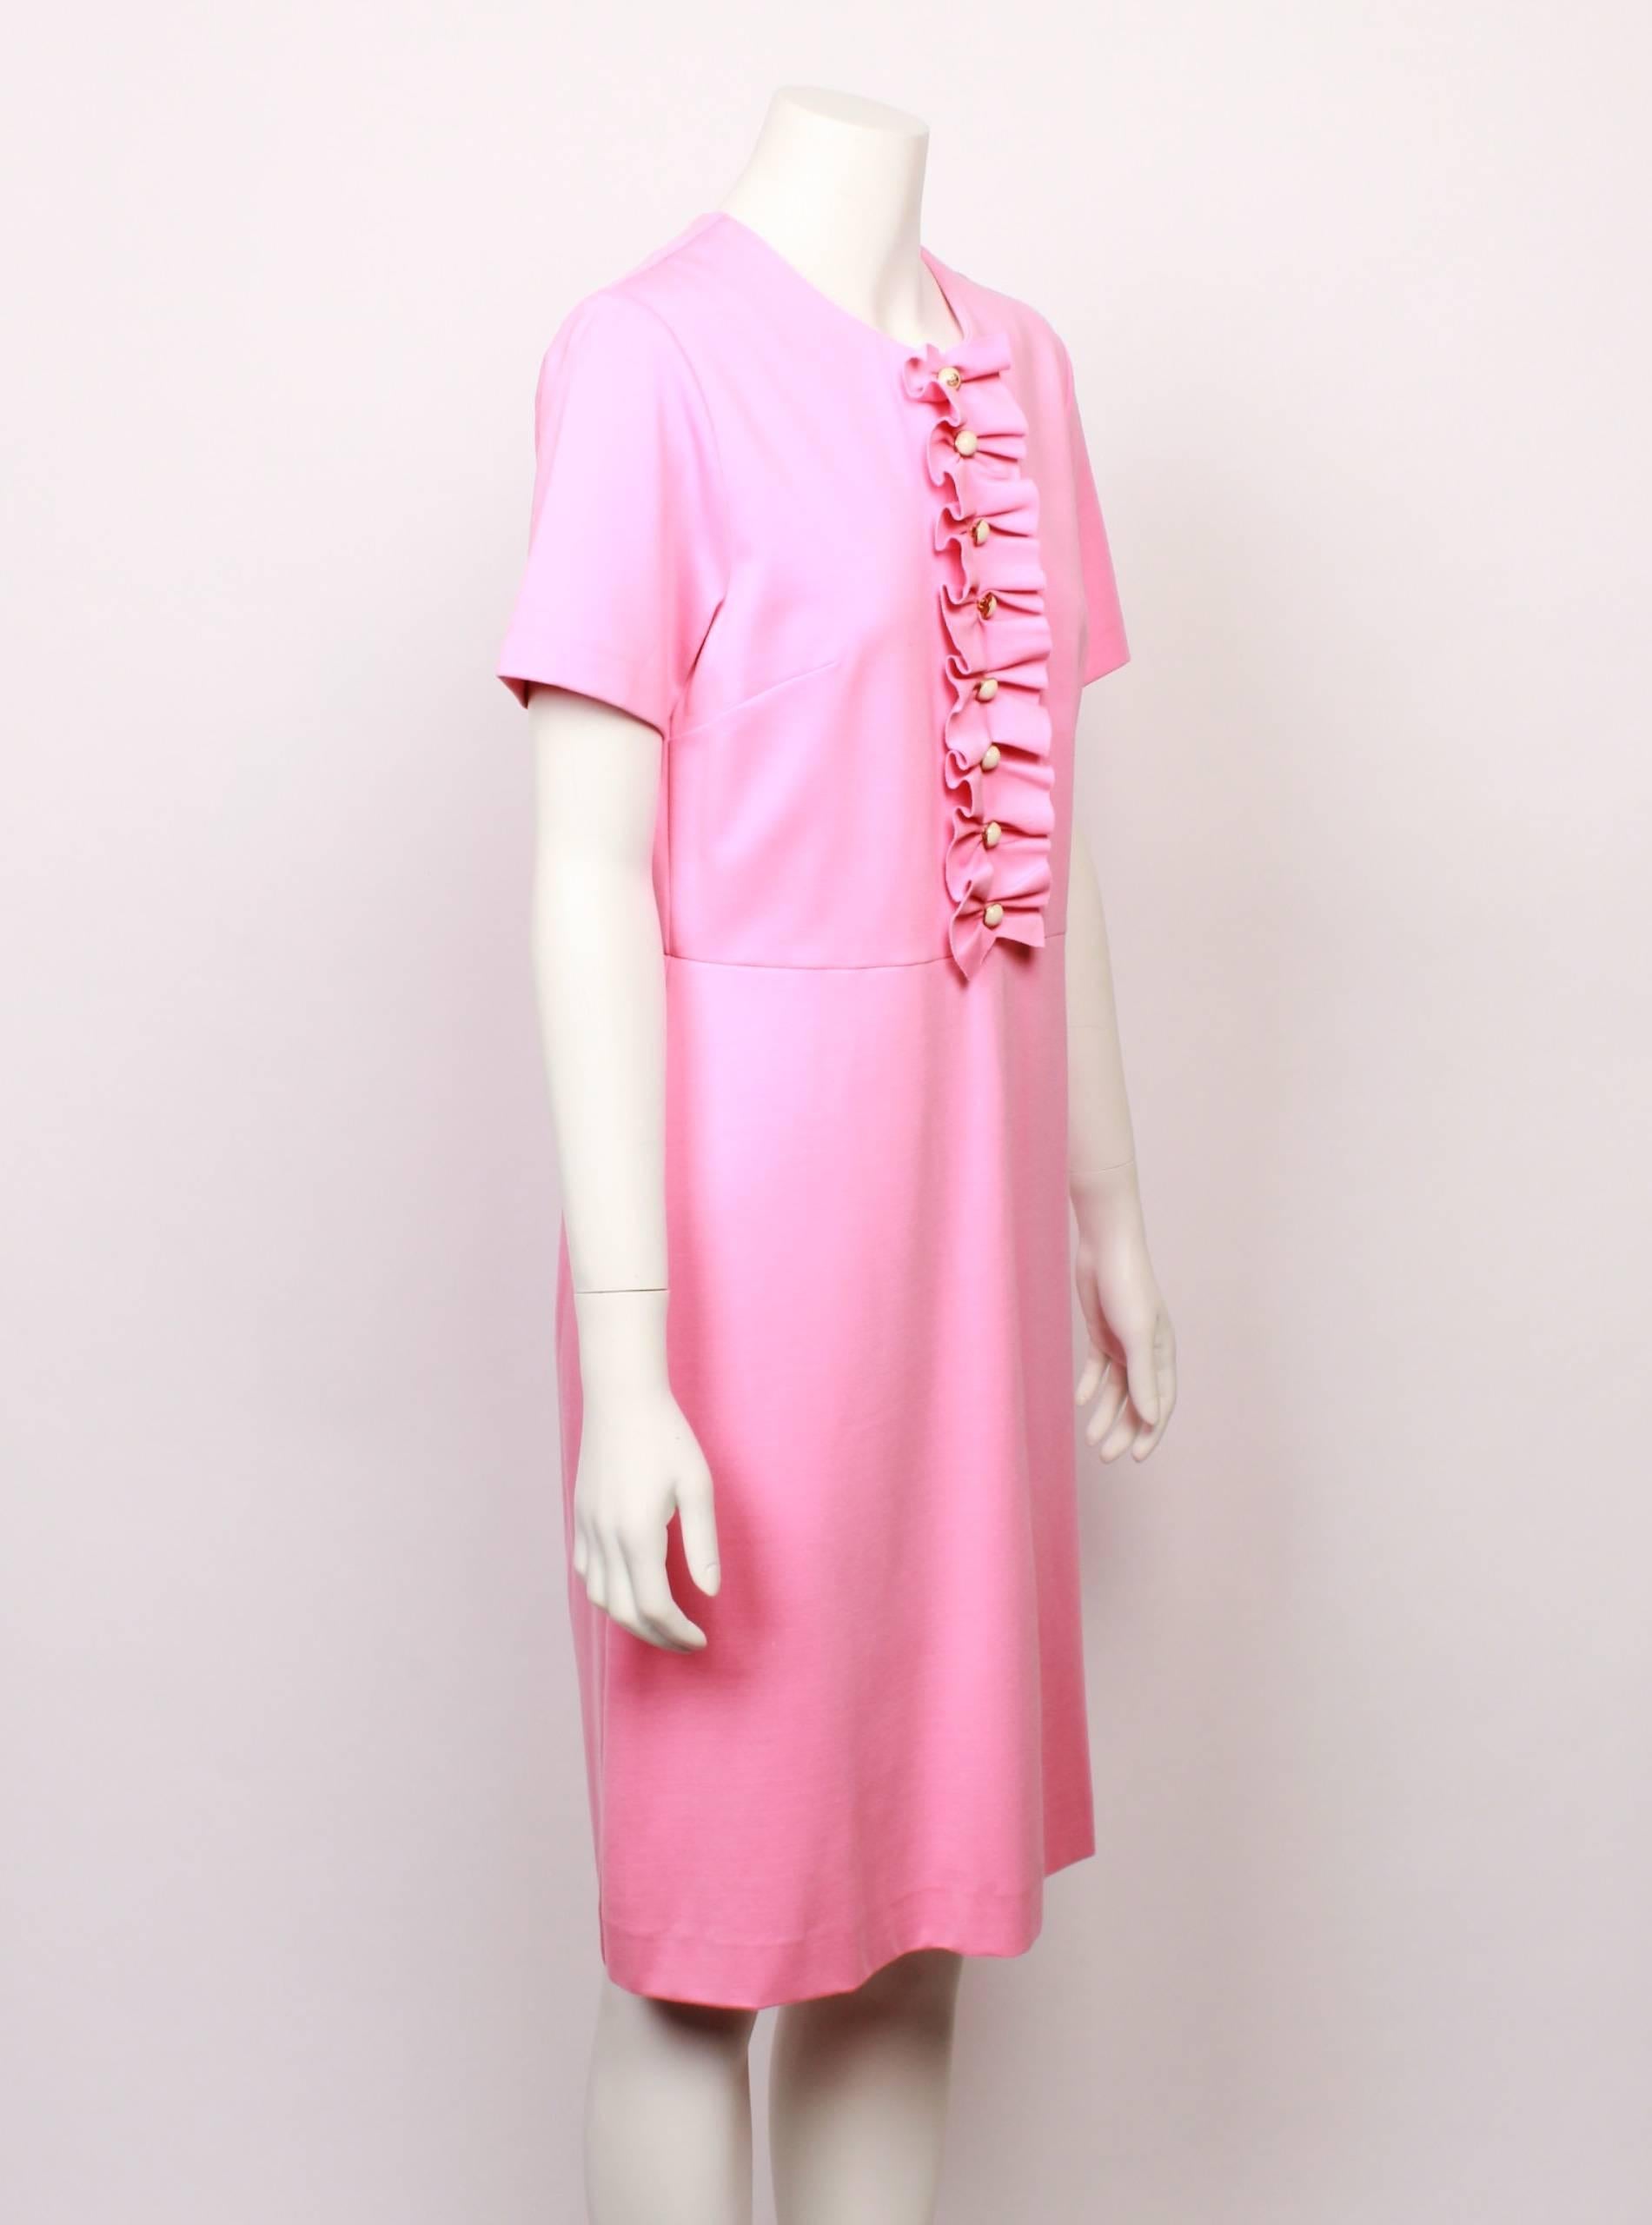 Wonderful musk pink Gucci shell dress with feature tuxedo frill. Semi fitted shell style silhouette with centre front frill and white and gold button feature . The dress is knee length and has short sleeves. Fabric is a soft knit with a slight